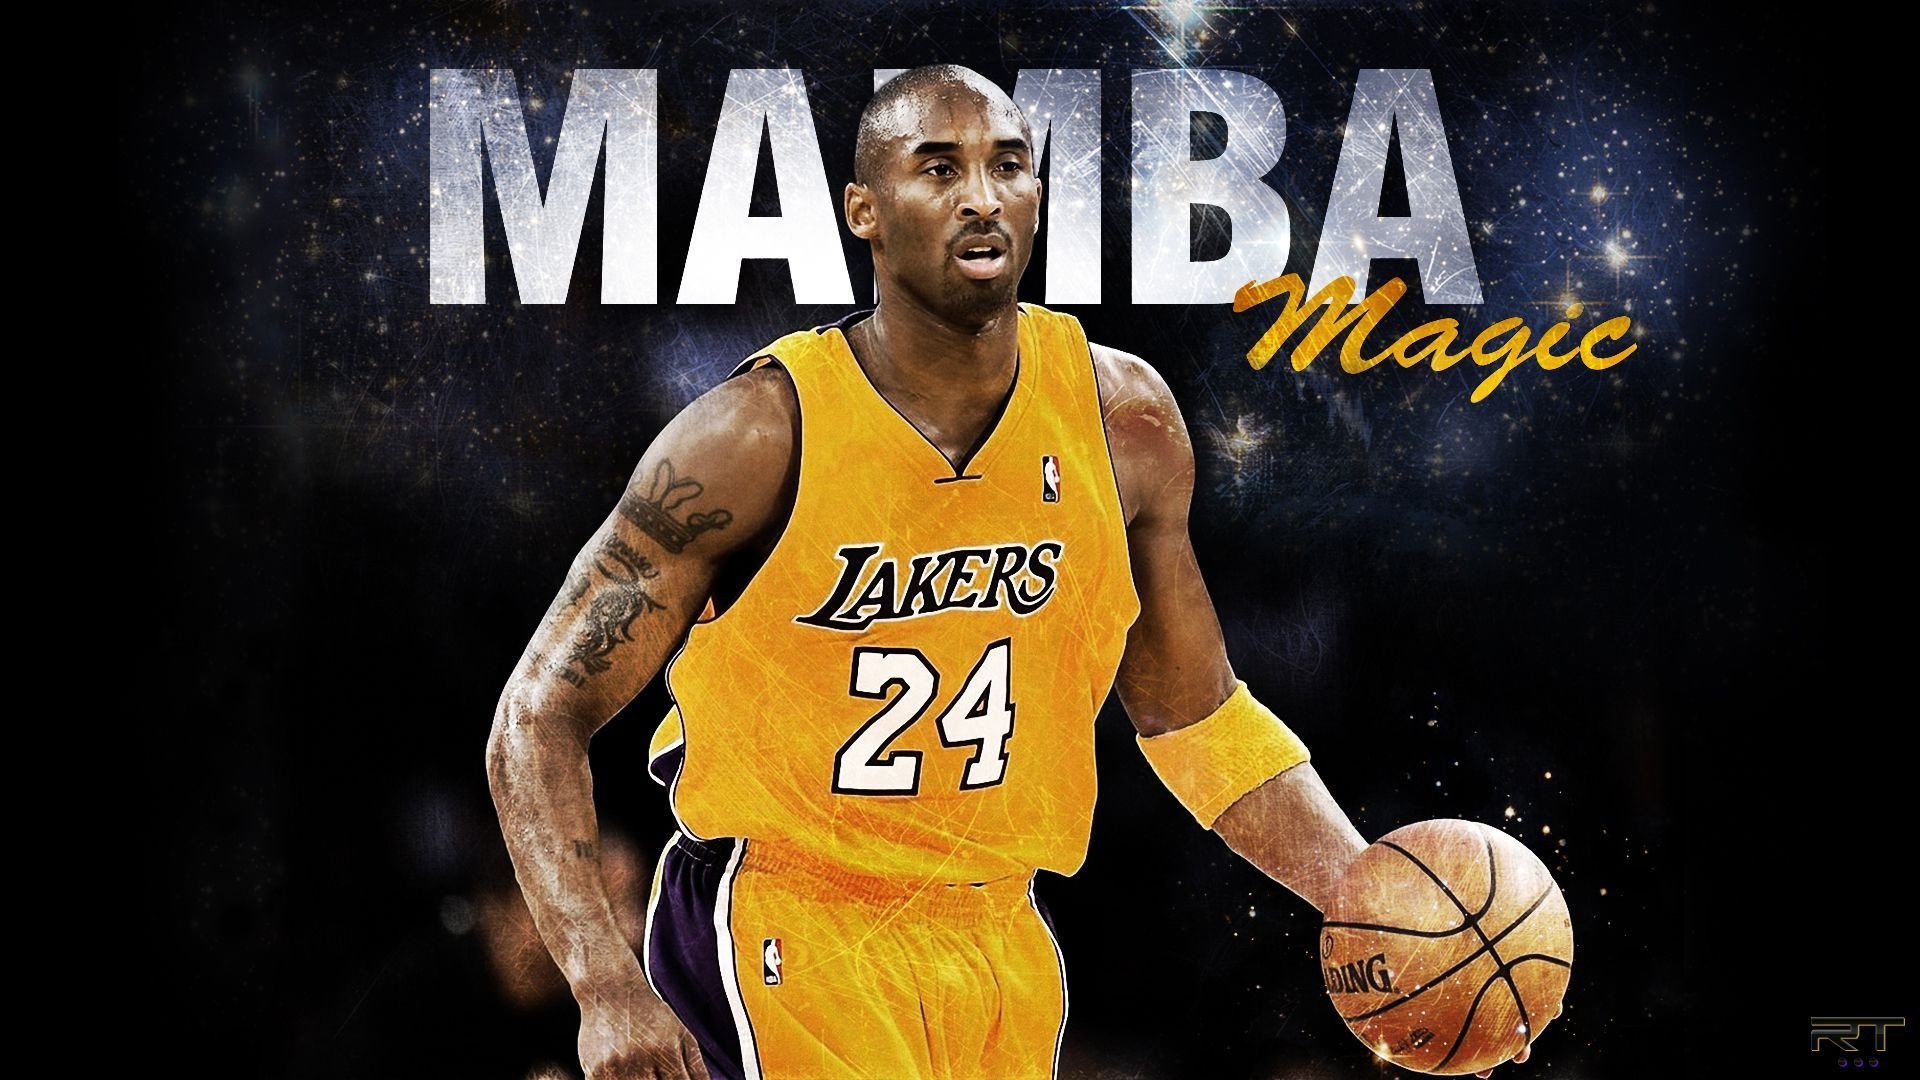 1920x1080 Kobe Bryant Wallpapers High Resolution and Quality Download